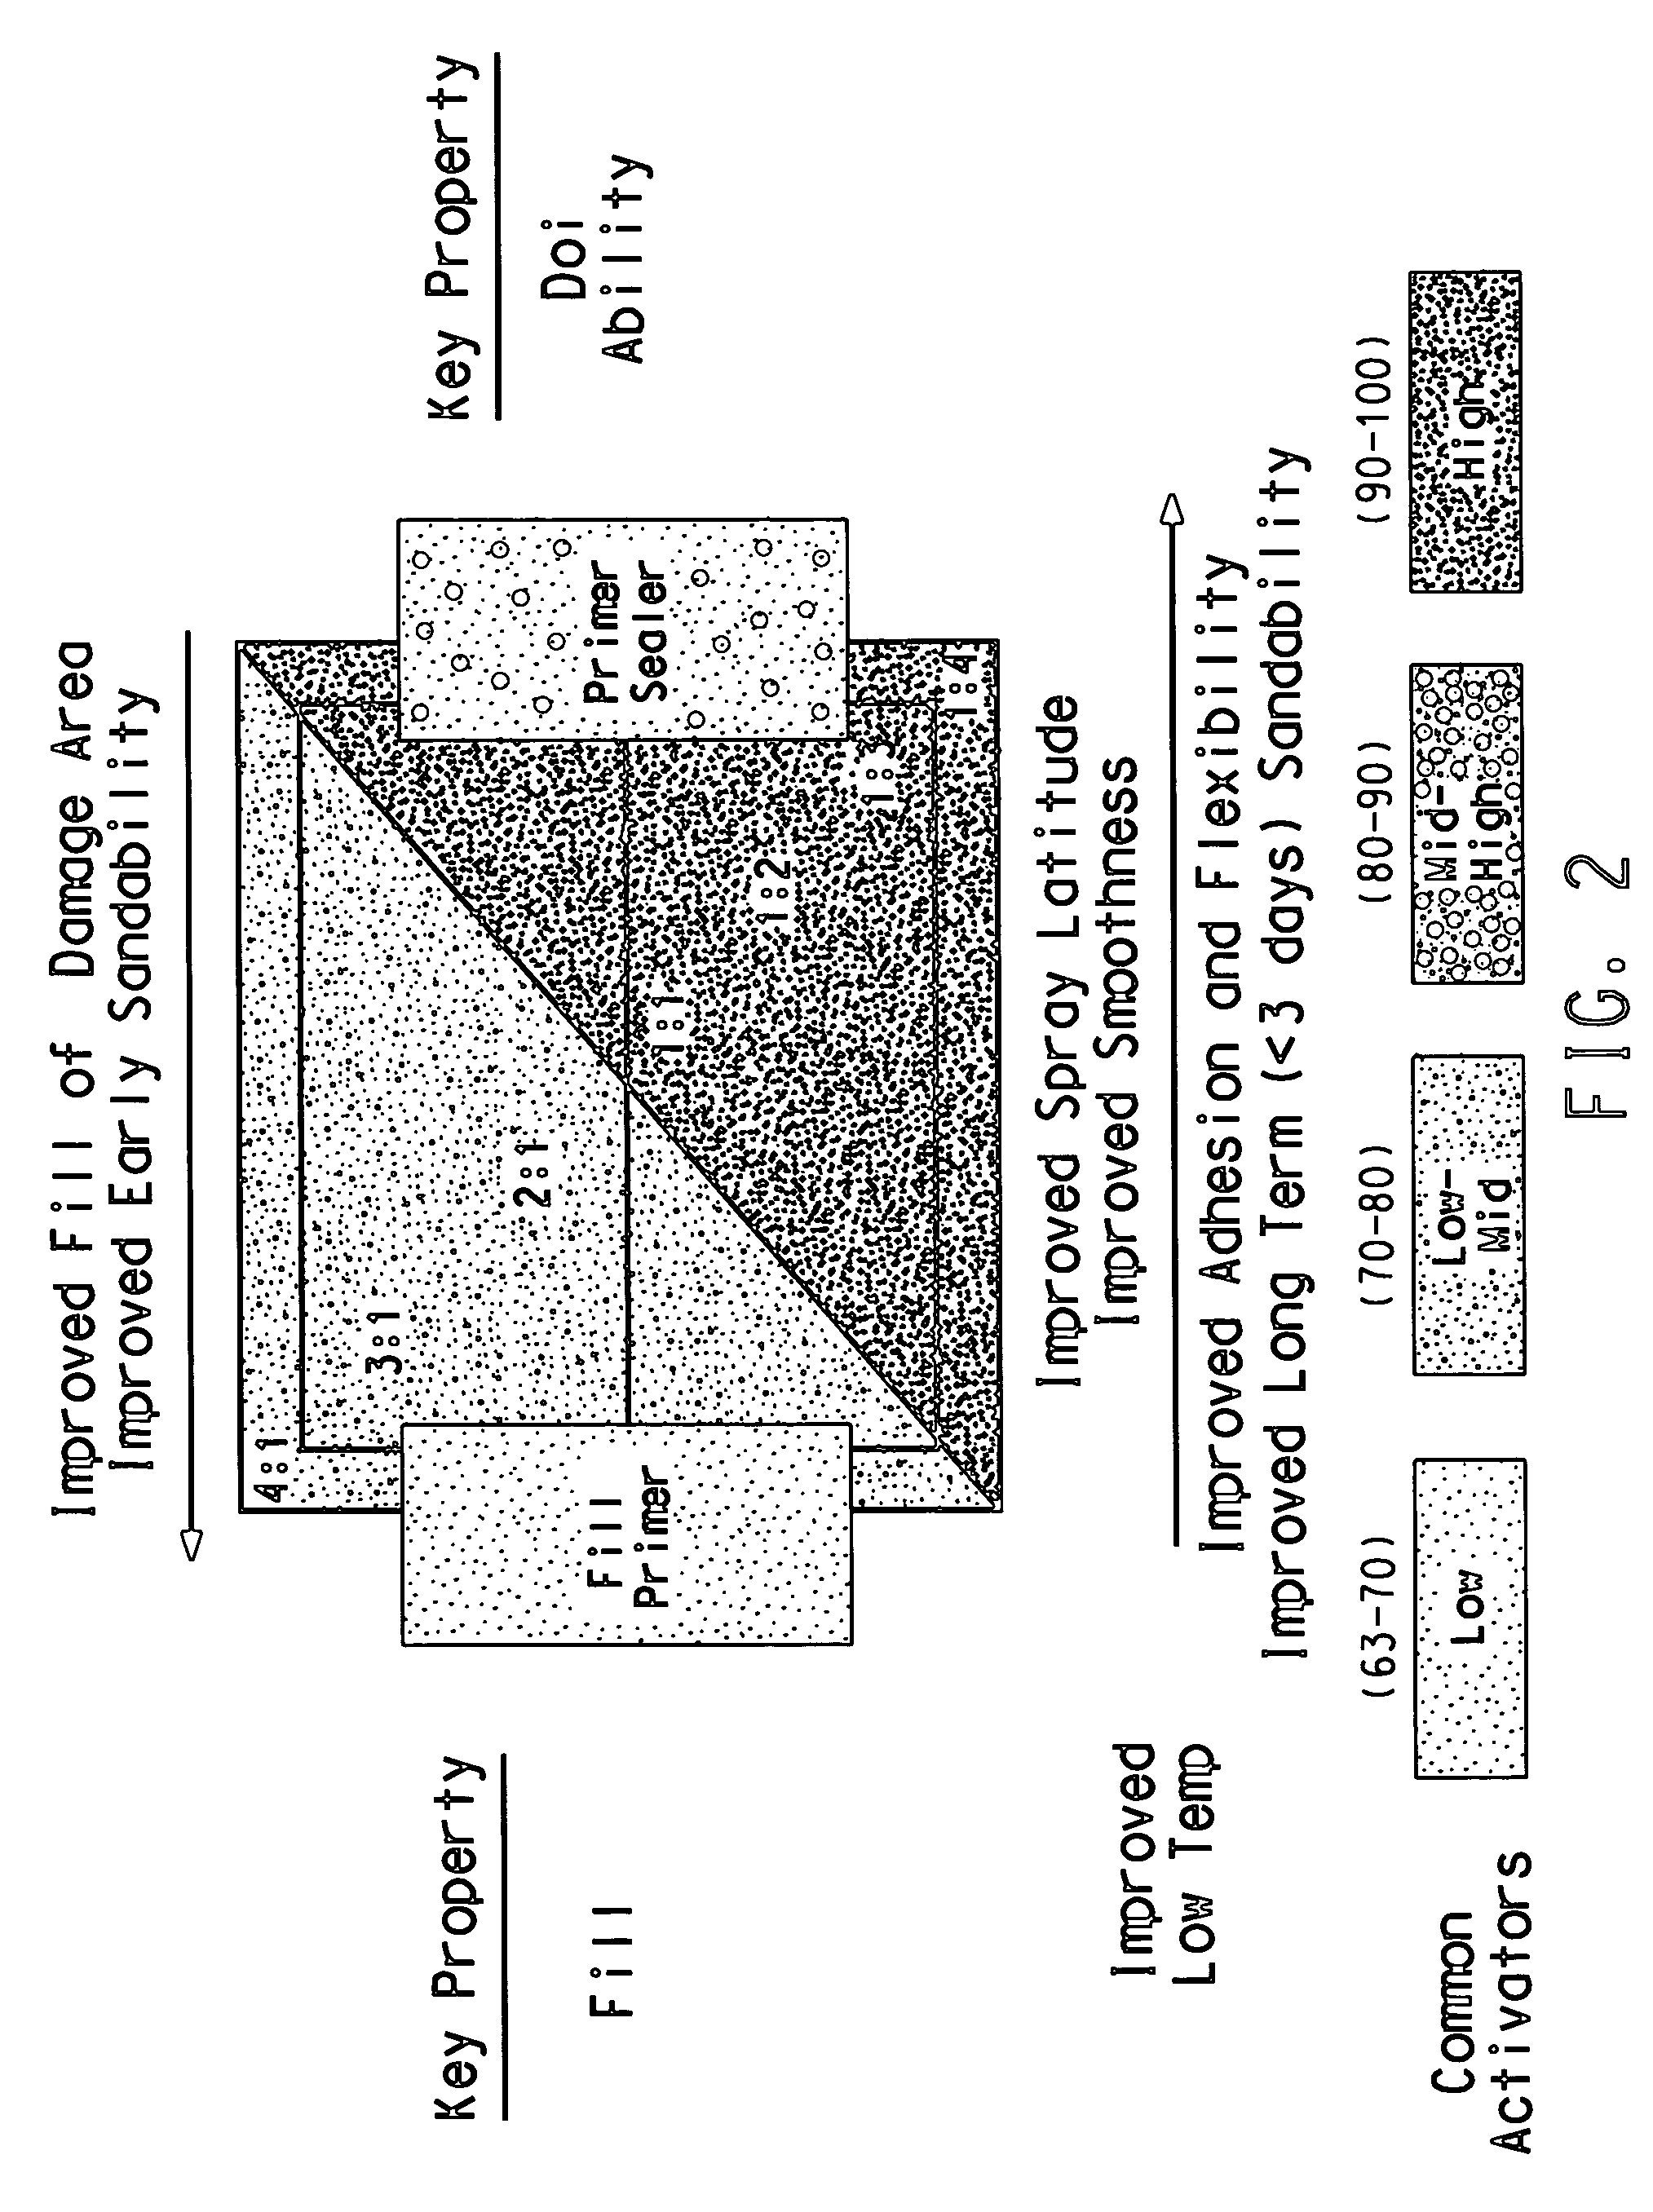 Process for producing coating compositions with customizable properties